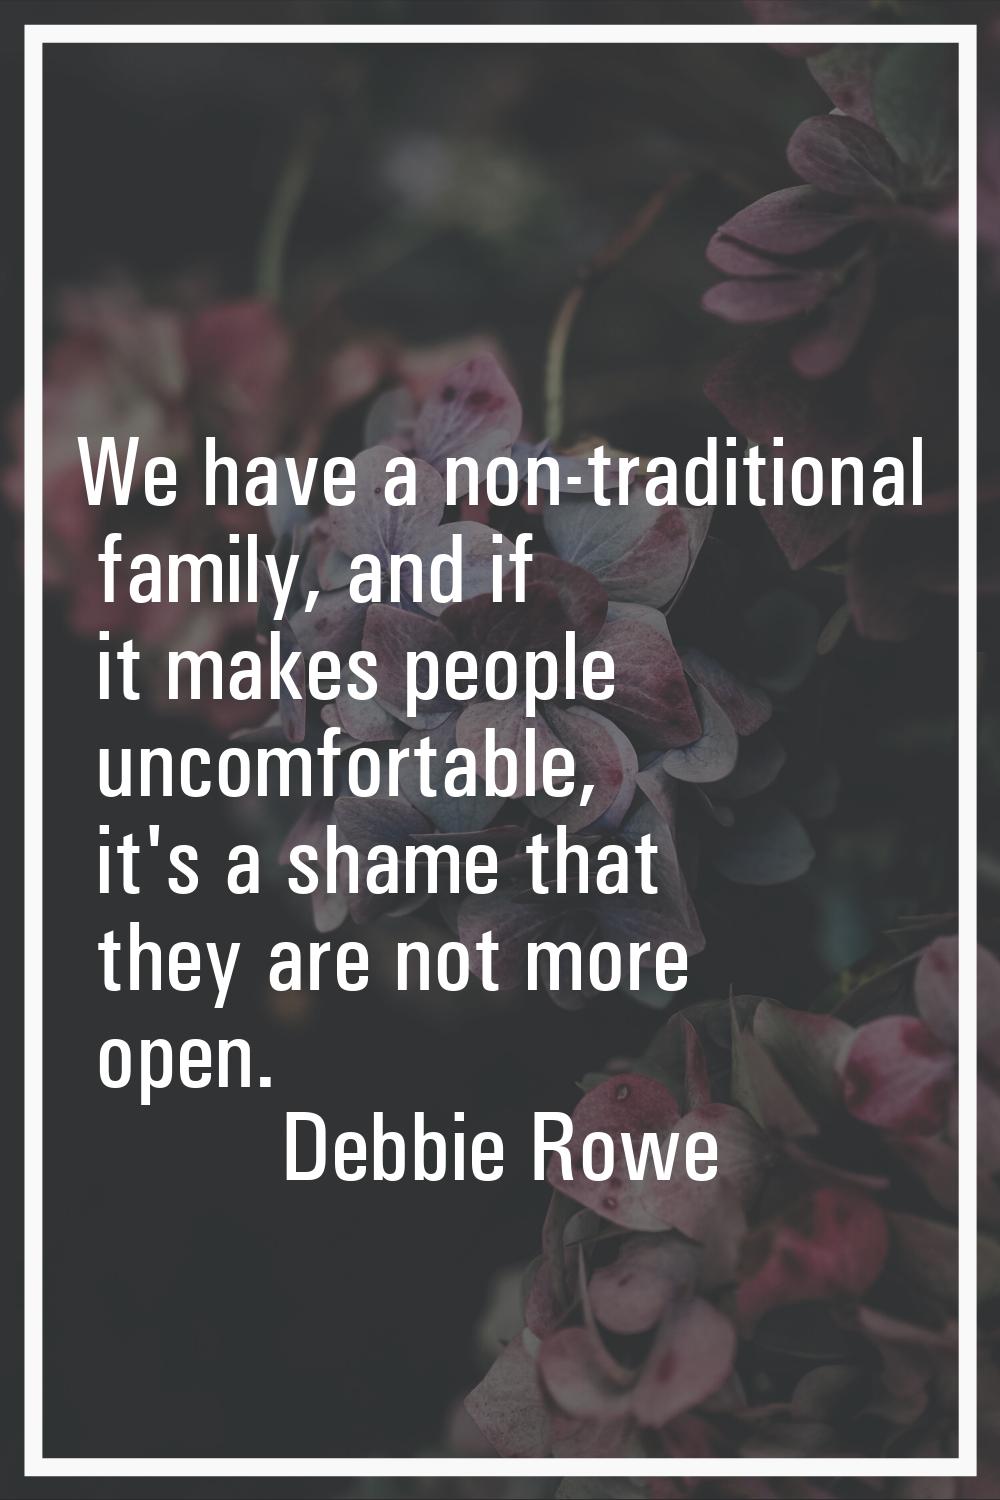 We have a non-traditional family, and if it makes people uncomfortable, it's a shame that they are 